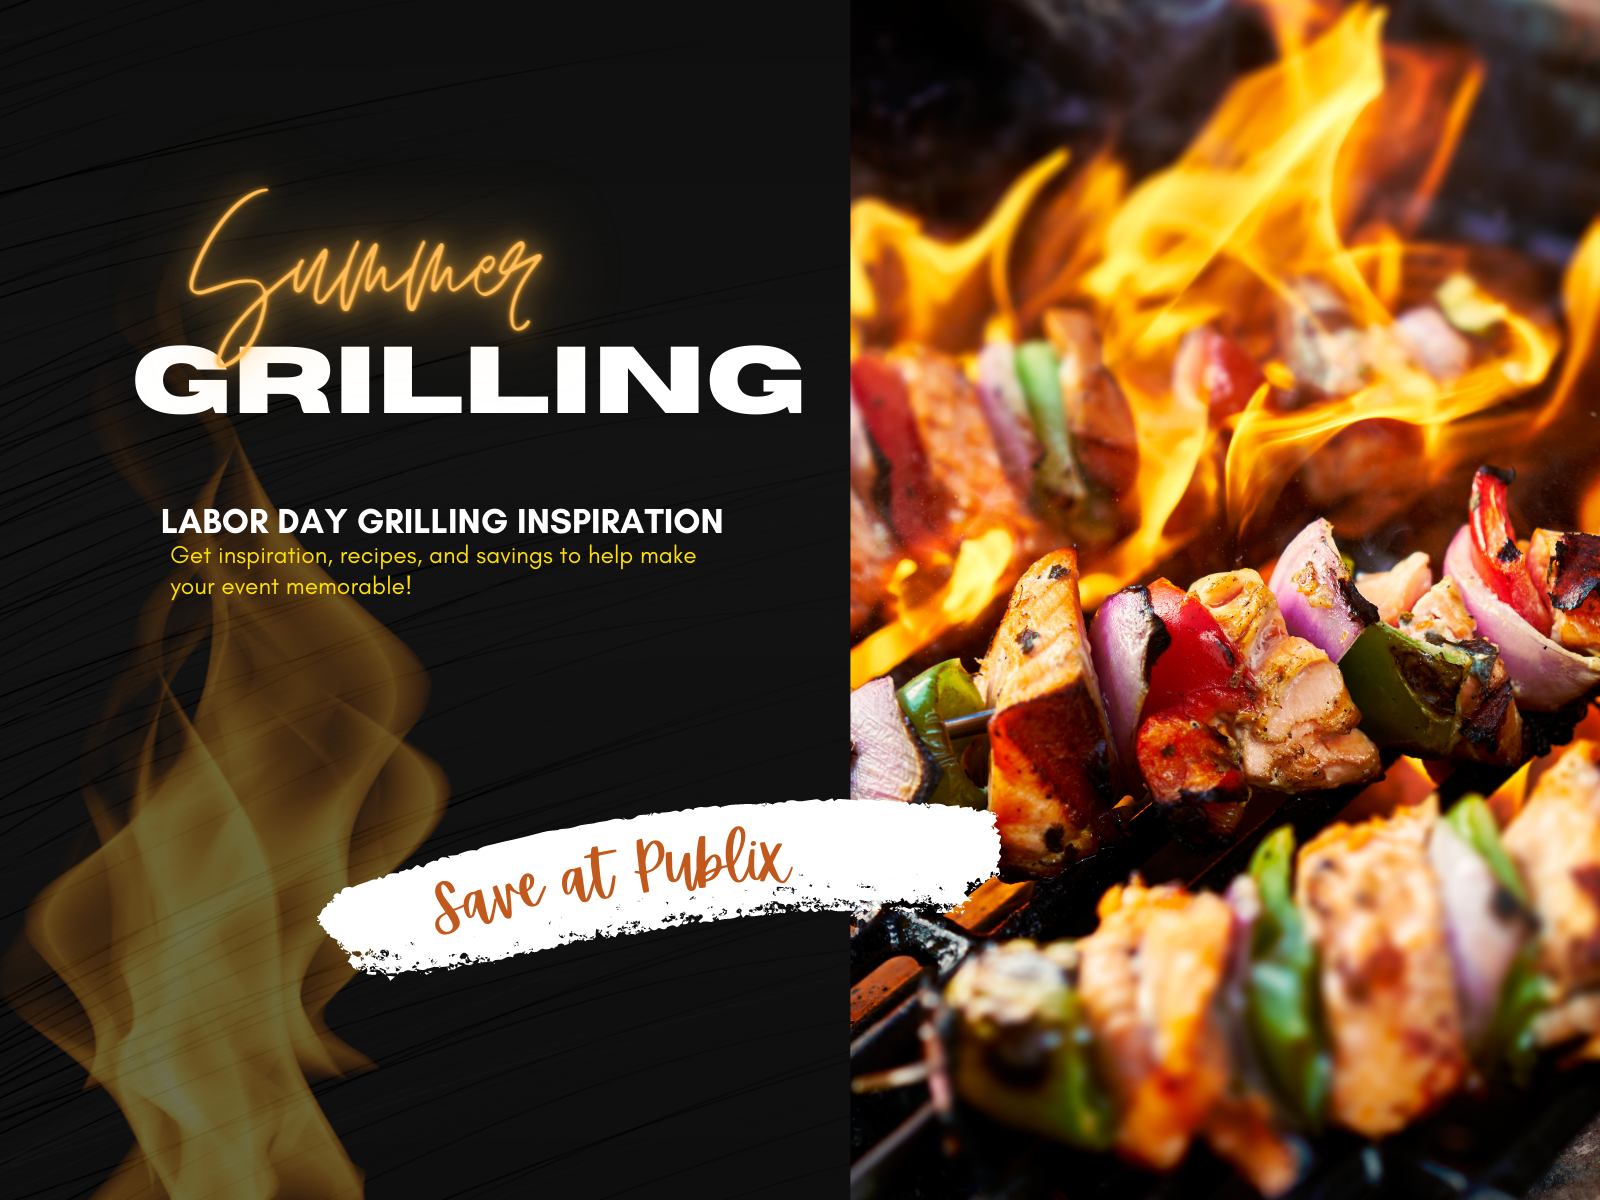 Your Labor Day Grilling Menu Made Easy – Get Inspiration, Recipes, And Savings For The Perfect Celebration!